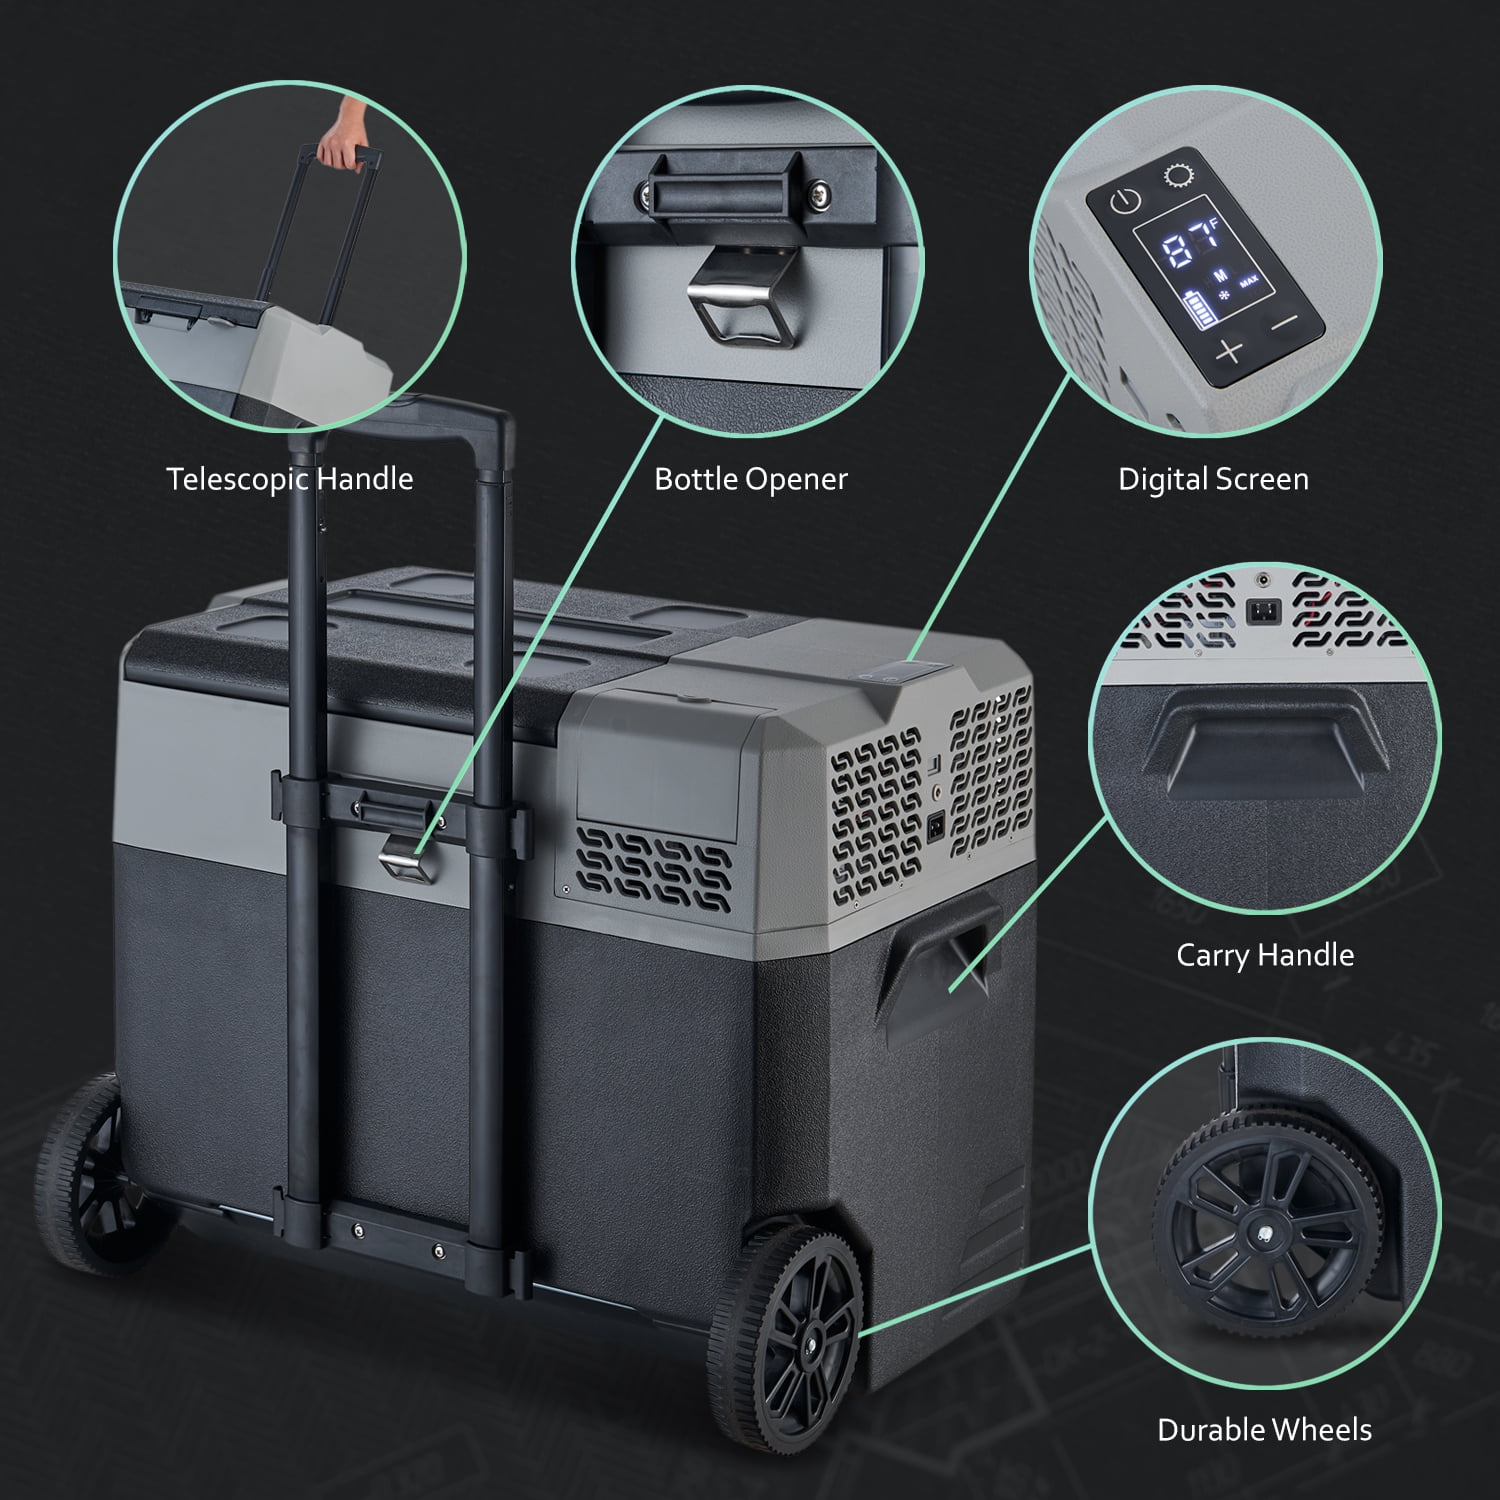 BornTech Portable Electric Cooler for Car Refrigerator Compact Fridge Freezer for Truck RV Boat 15 Liter